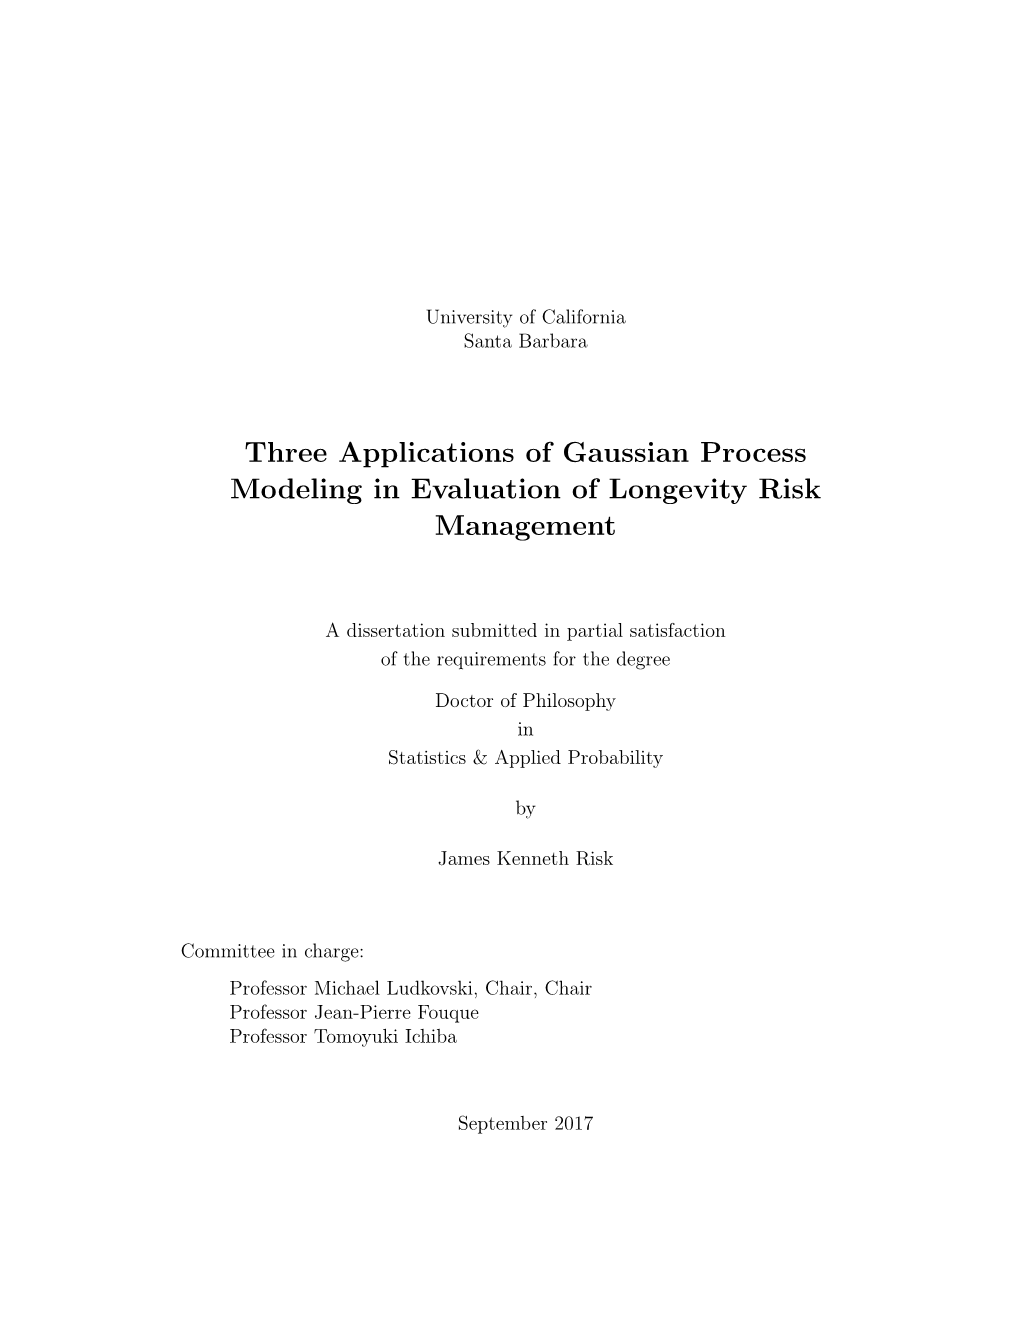 Three Applications of Gaussian Process Modeling in Evaluation of Longevity Risk Management